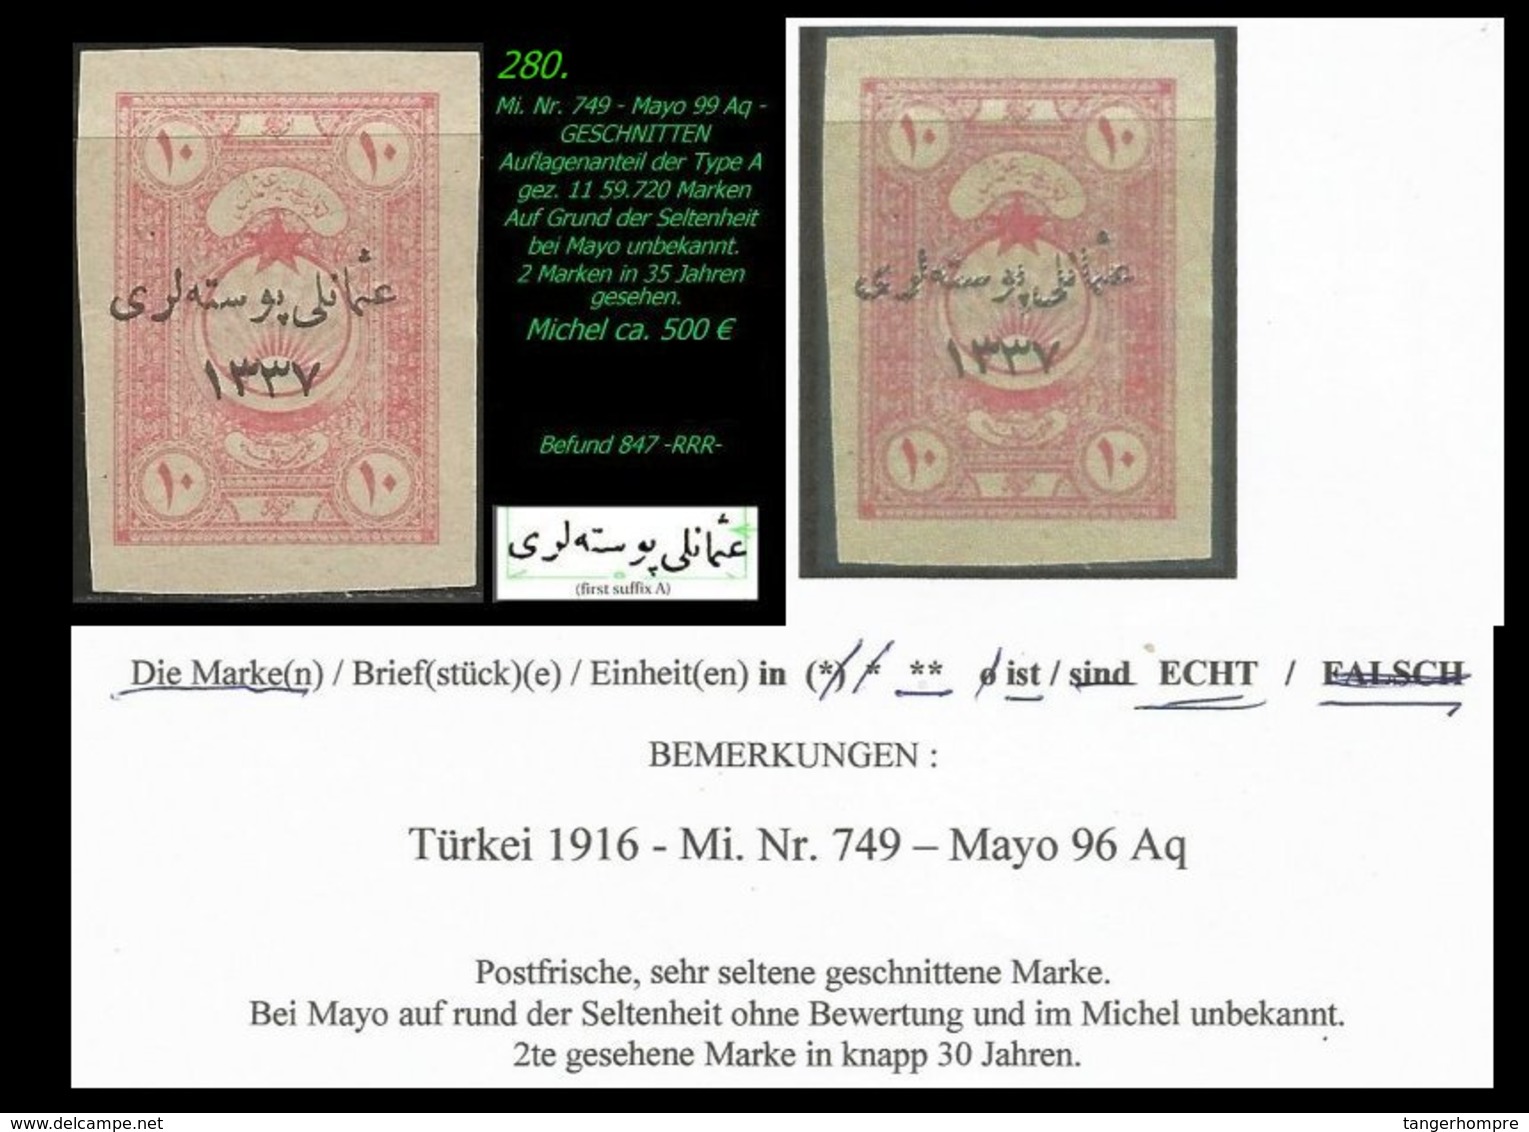 EARLY OTTOMAN SPECIALIZED FOR SPECIALIST, SEE...Mi. Nr. 749 - Mayo 99 Aq - Ungezähnt -RRR- - 1920-21 Anatolie